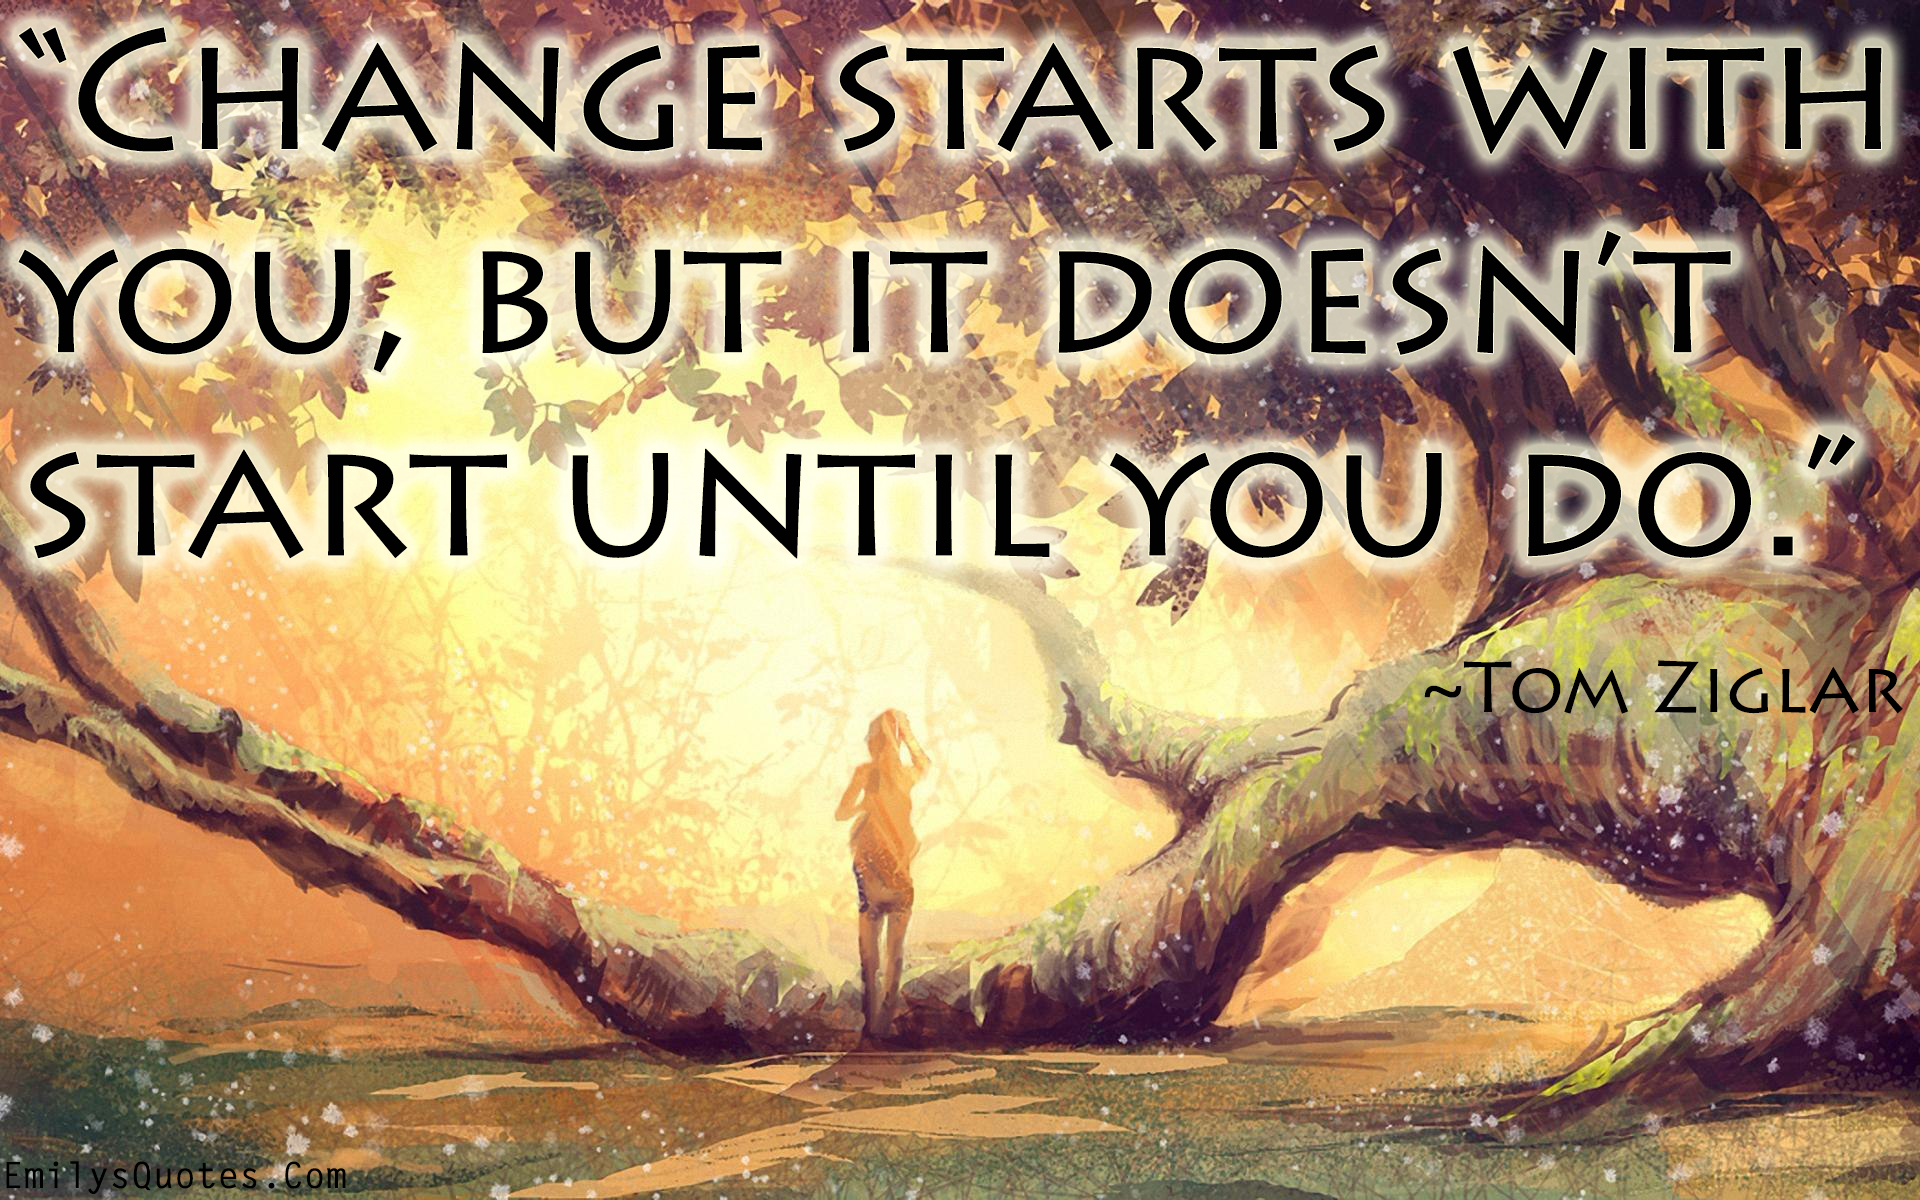 Change starts with you, but it doesn’t start until you do